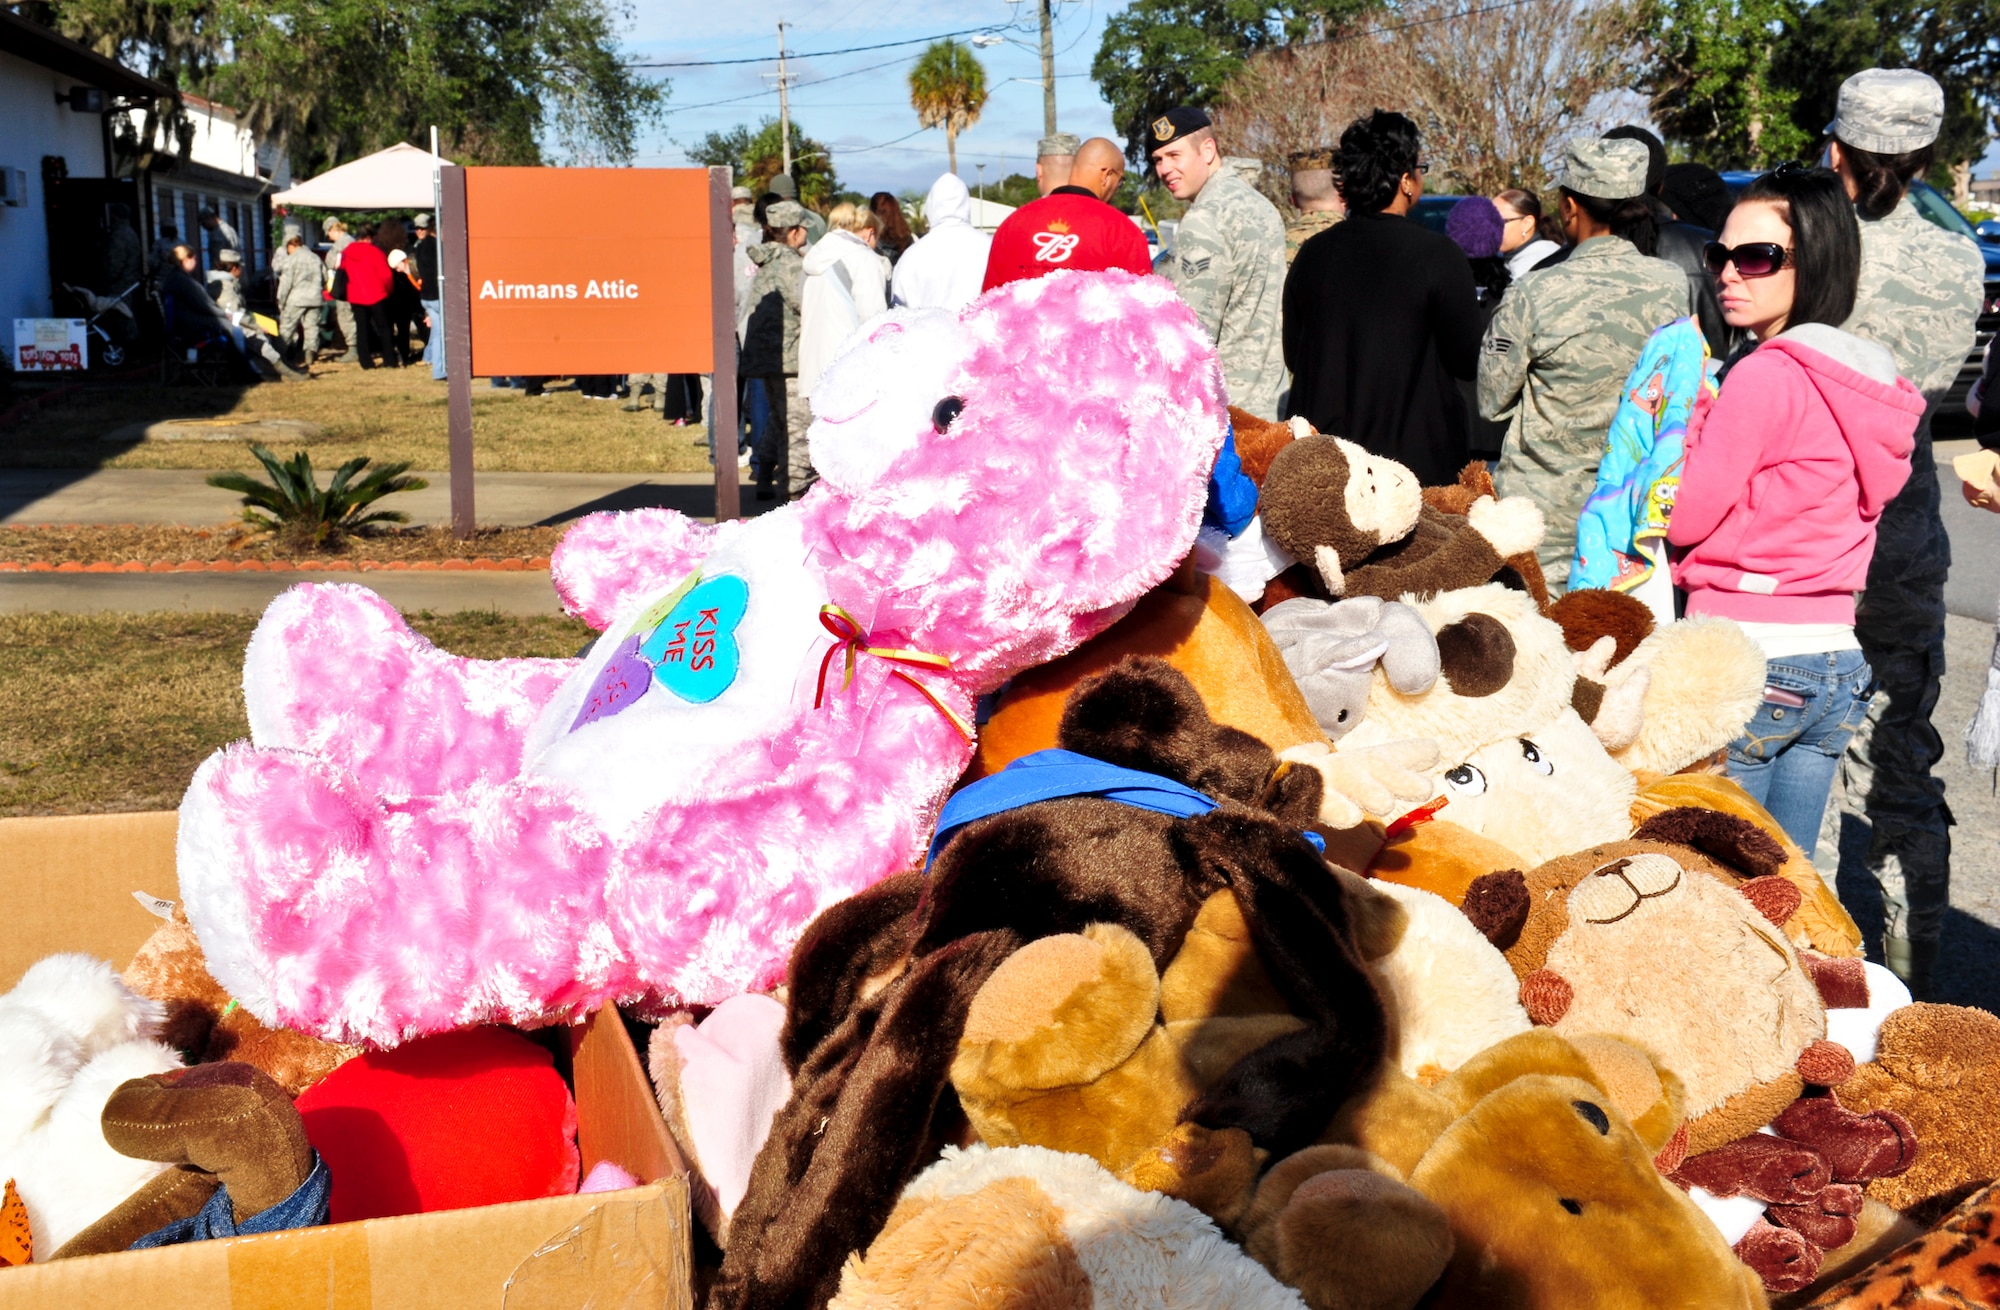 Families began lining up as early as 4 a.m. outside the Airman’s Attic for the 8th annual toy distribution Nov. 30.  More than 4,000 toys were donated for the event, helping more than 200 families in the Eglin community. (U.S. Air Force photo/Sachel Seabrook)